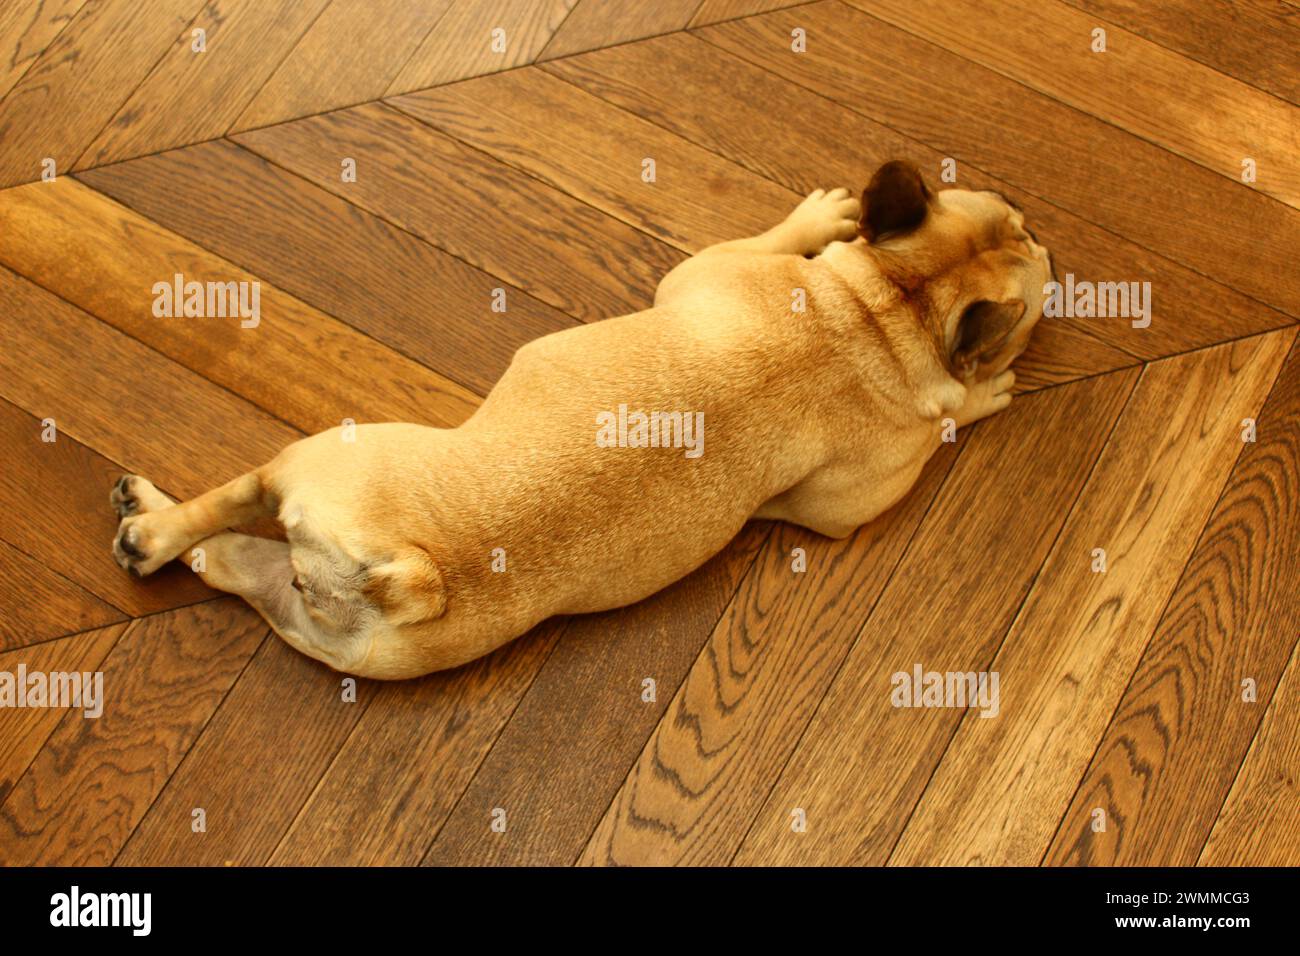 Top down portrait of a fawn French Bulldog on wood seen lying down and relaxing on a wooden floor Stock Photo